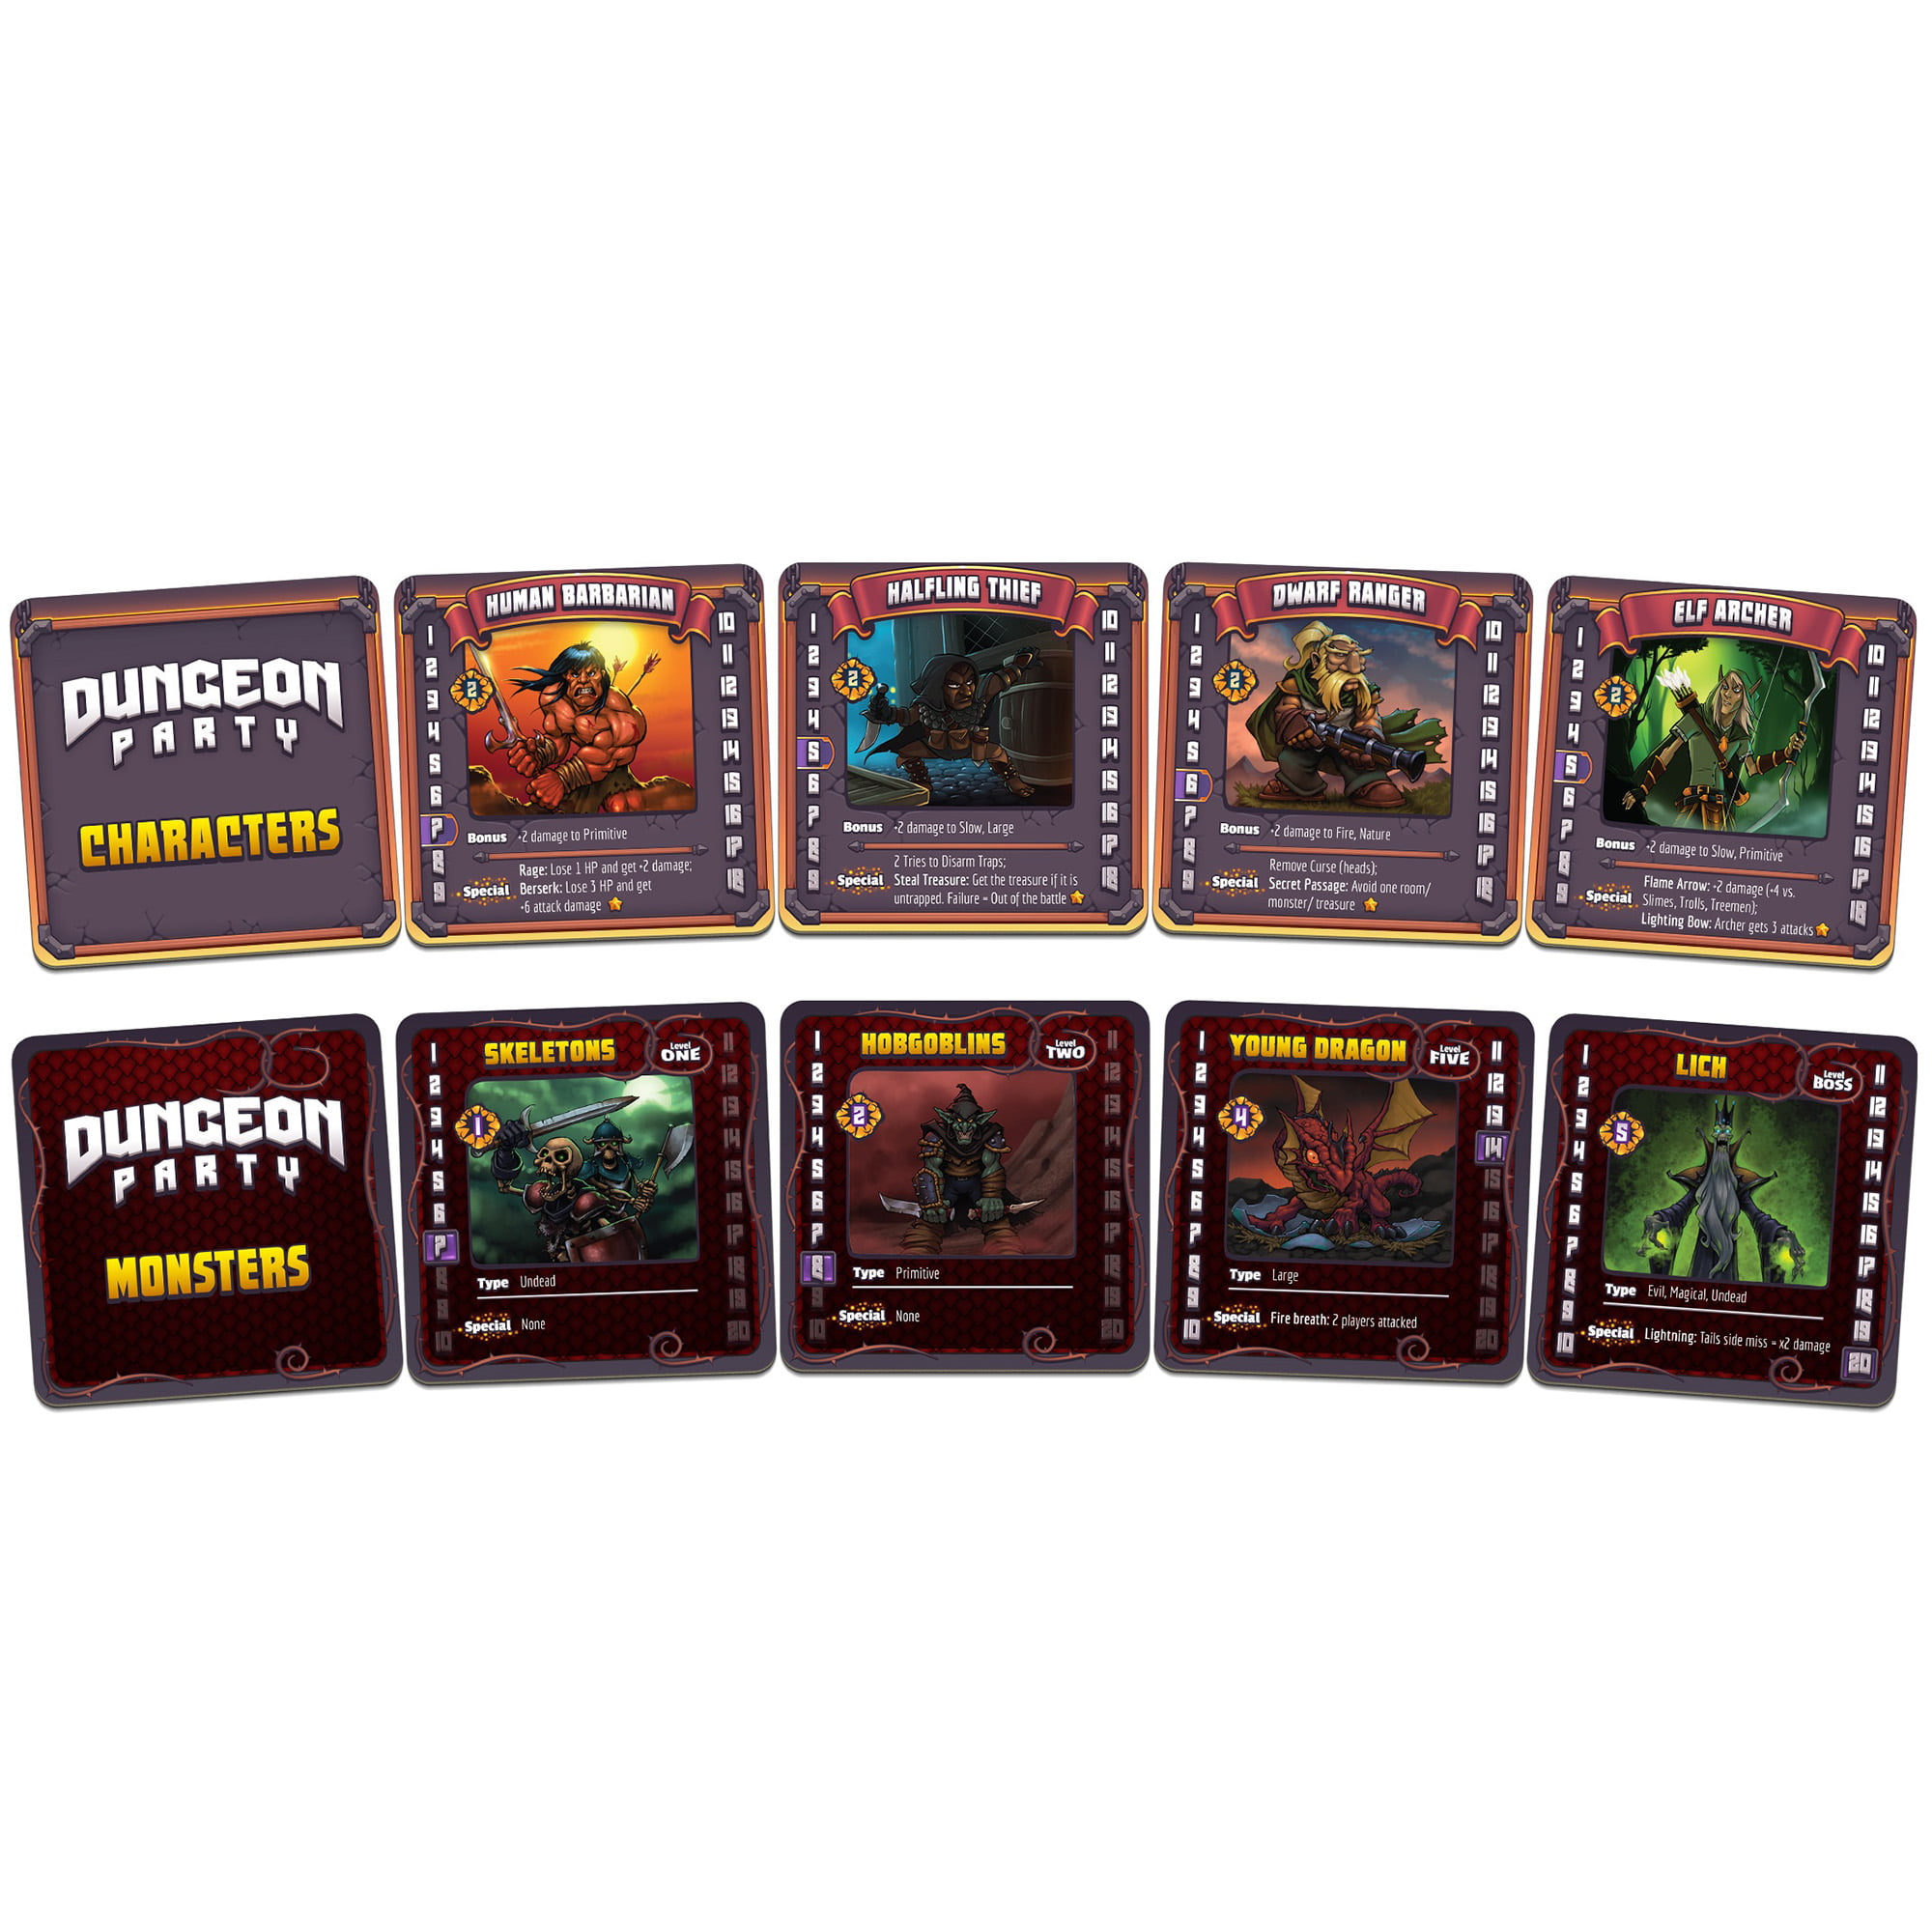 Role Playing Game - Adult Version, Printable Card Game